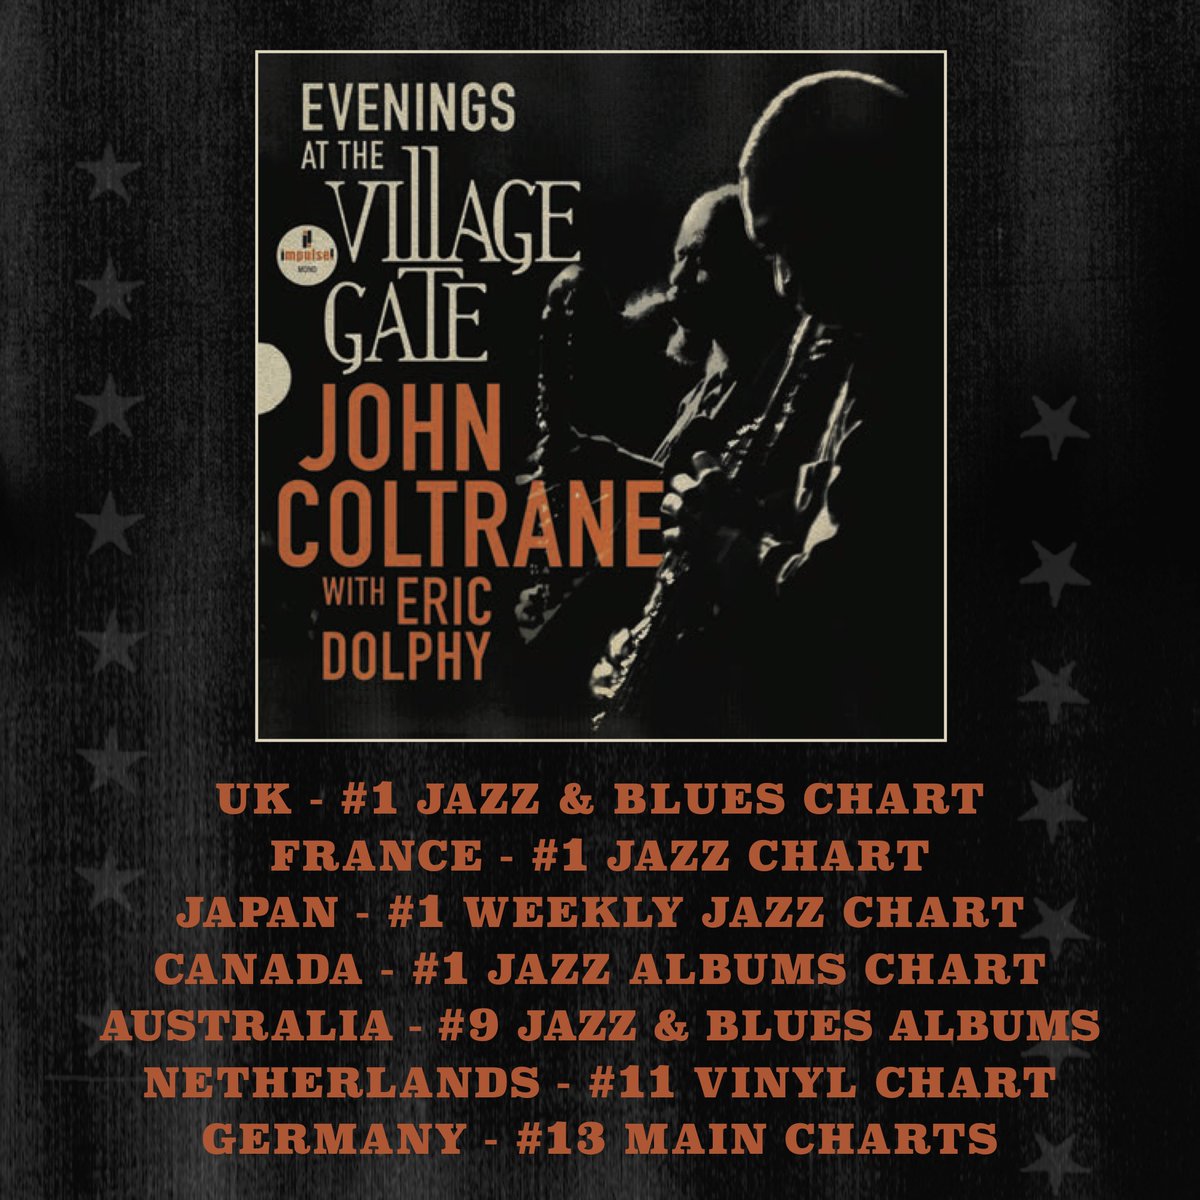 Evenings at the Village Gate: John Coltrane with Eric Dolphy Listen here: johncoltrane.lnk.to/VillageGateIB